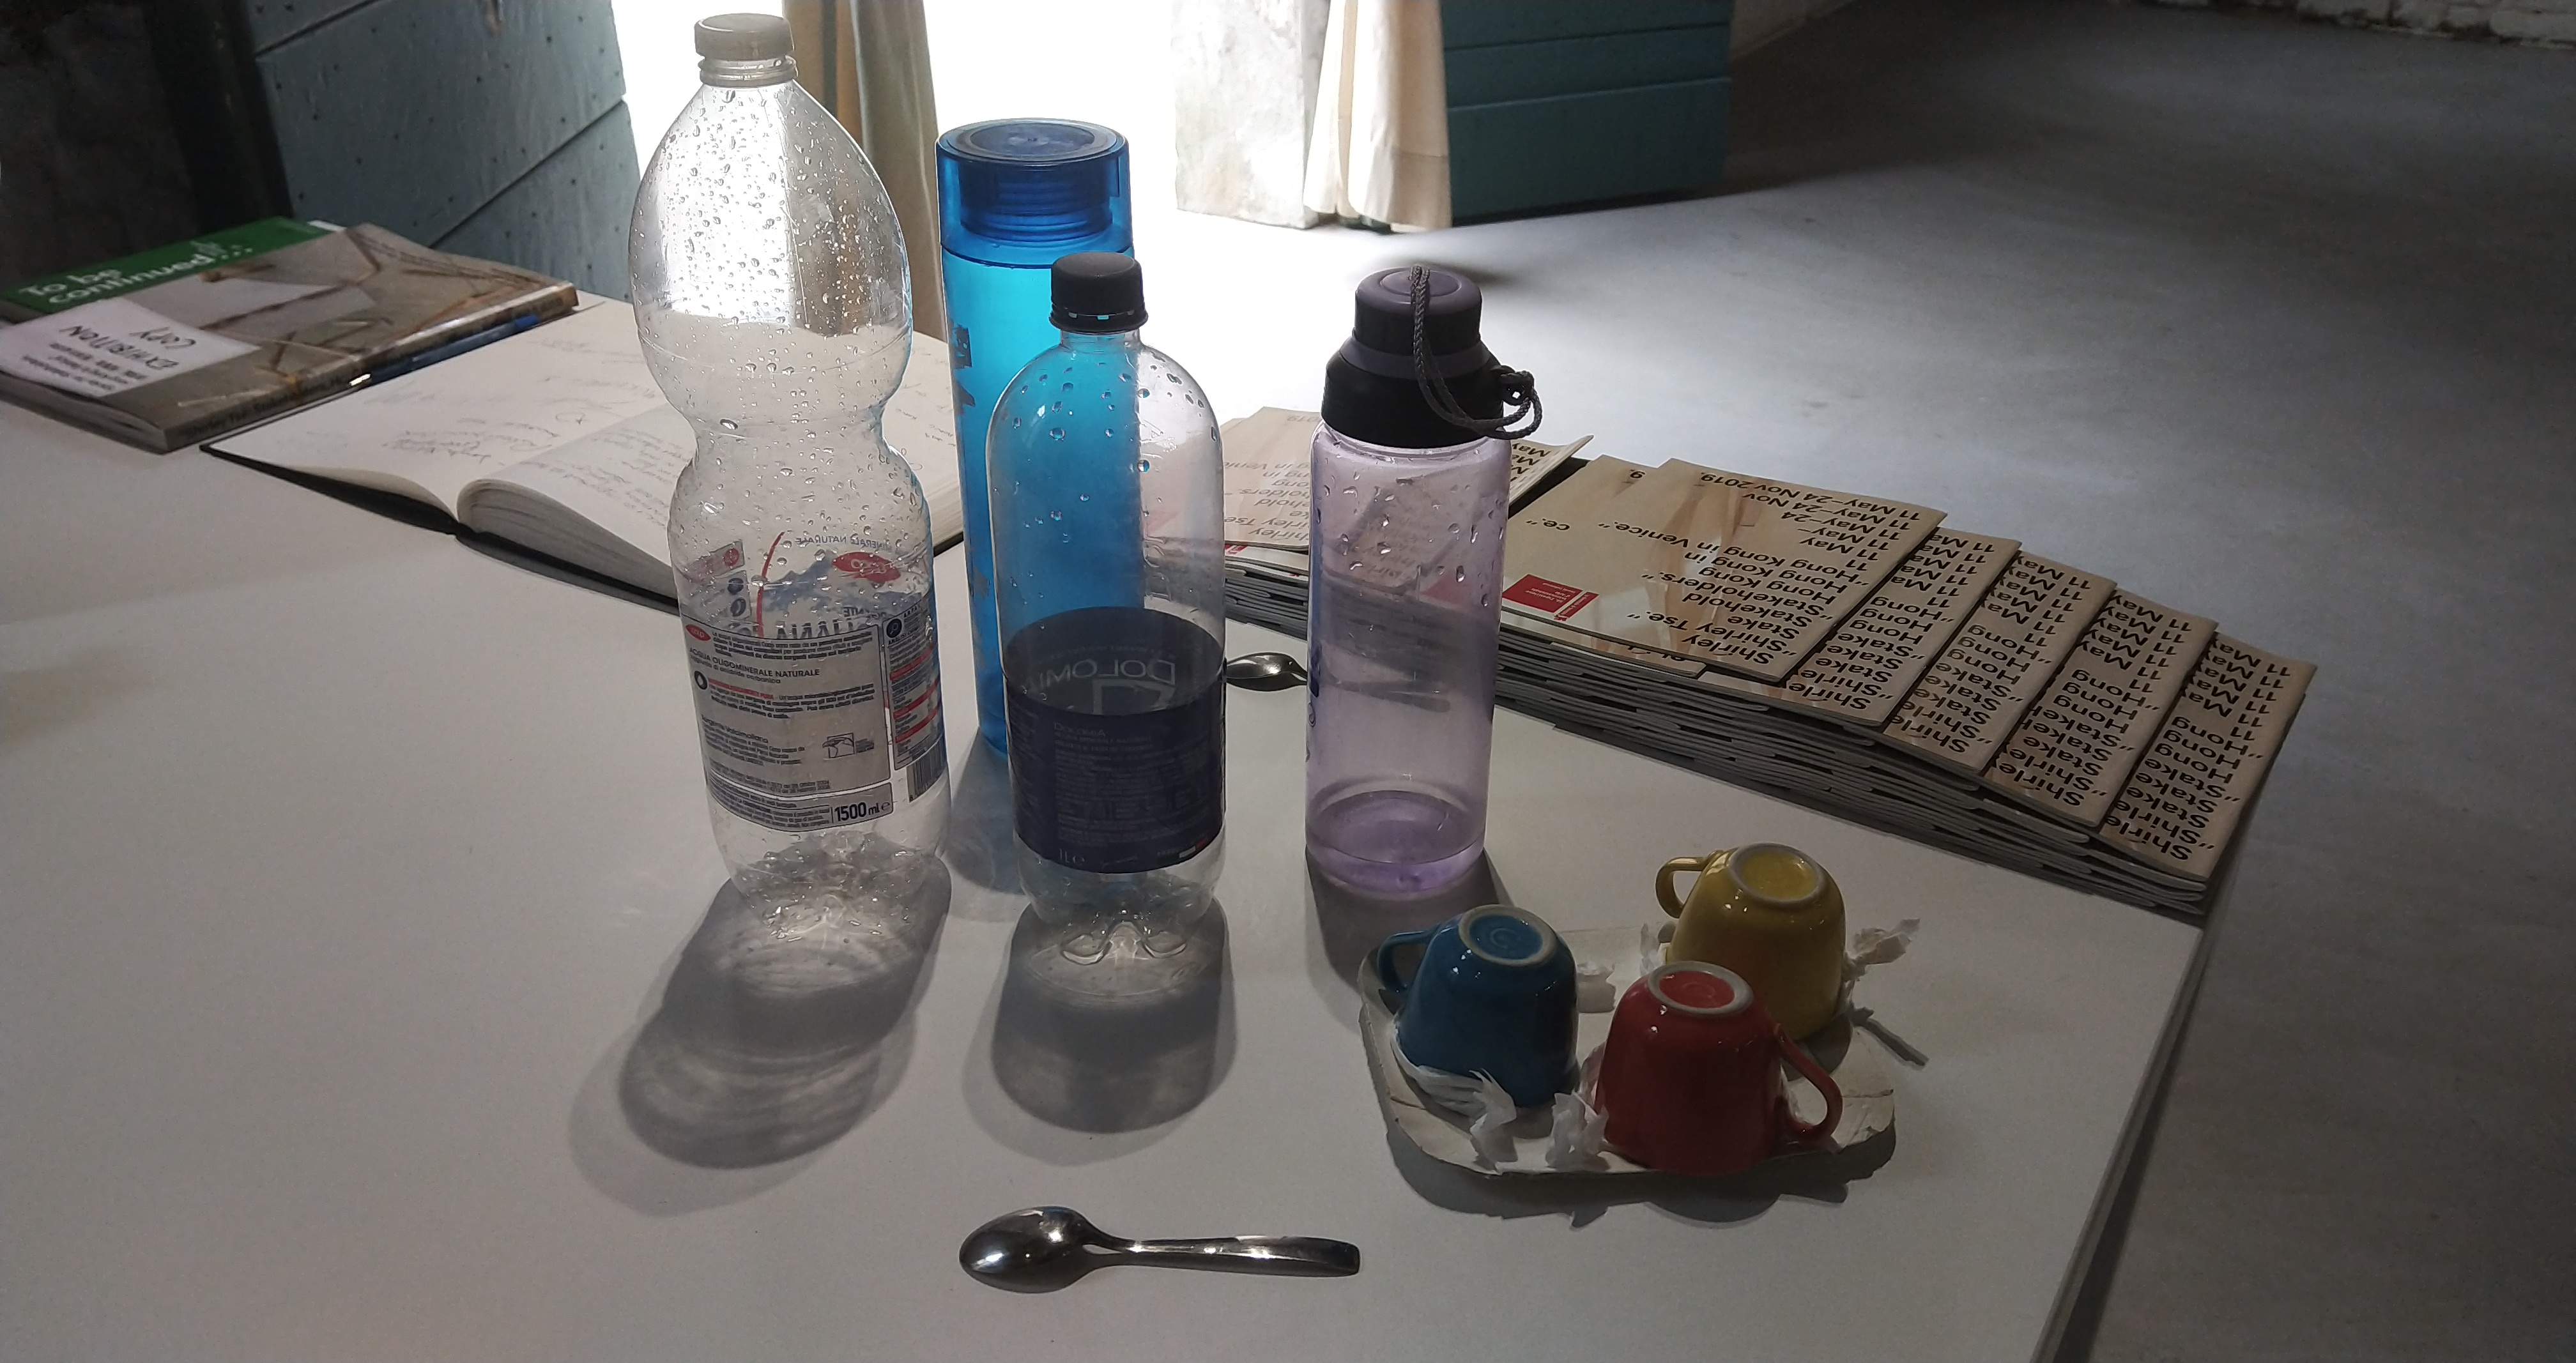 (From left to right, top to bottom) Shared bottle, Annie’s bottle, Spoon Victoria, Francesco’s bottle, Saiwing’s bottle, Spoon Imperial, random coffee cups were imitating Playcourt at reception.